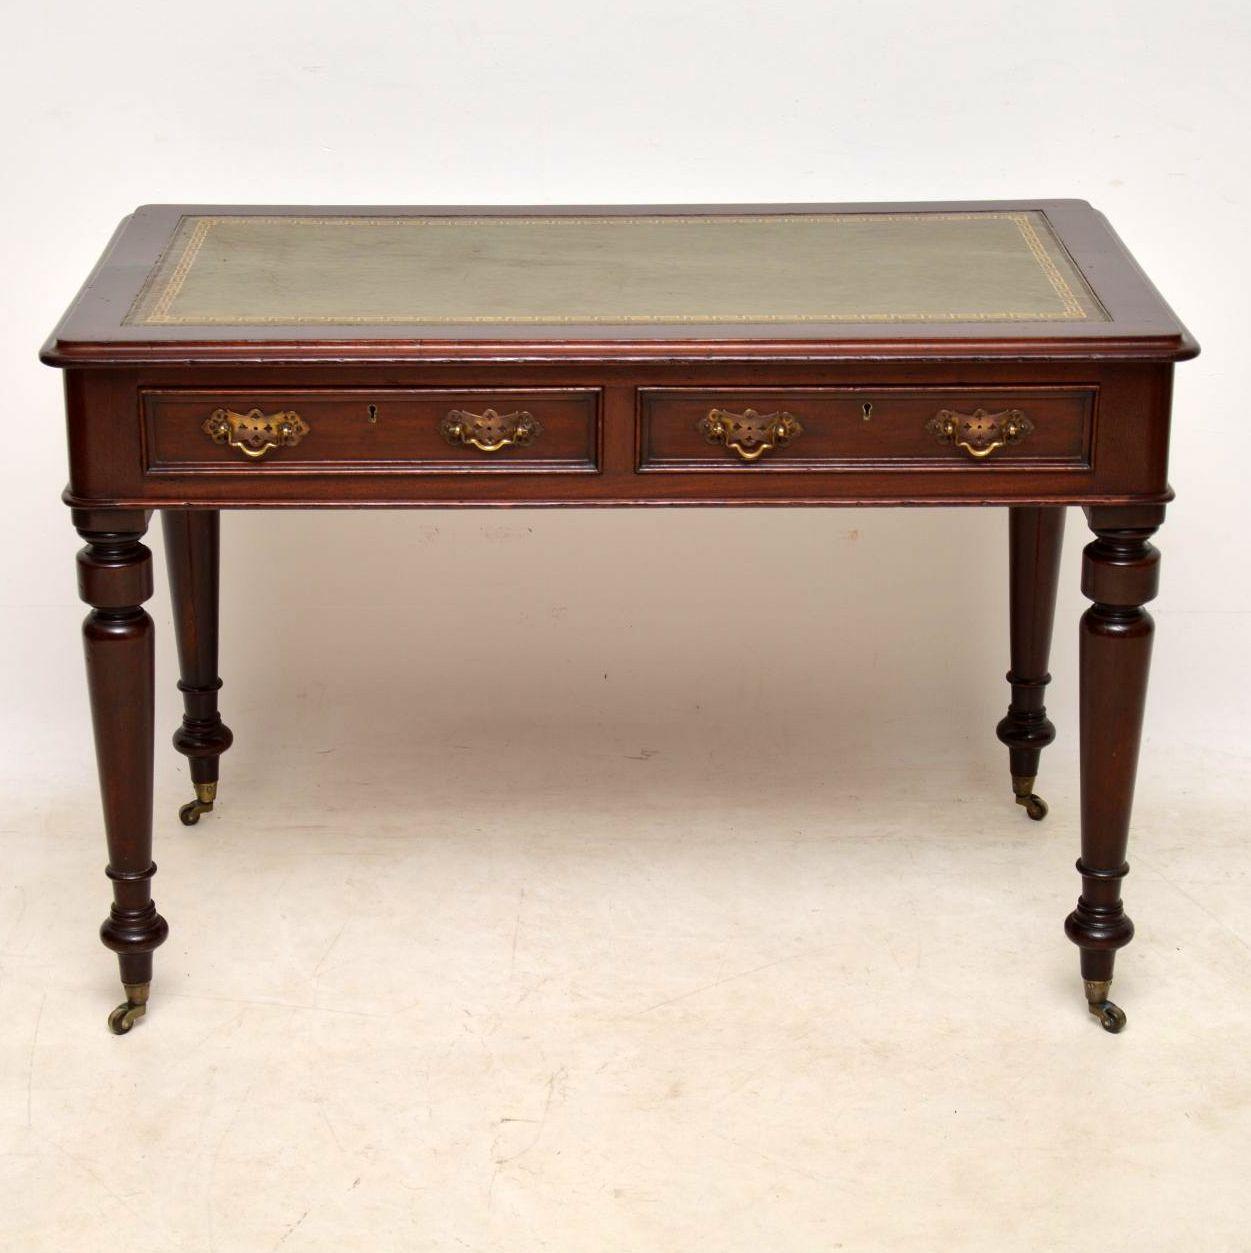 Antique Victorian leather top mahogany writing table in good condition and dating from around the 1860s-1880s period.
This desk has a tooled leather writing surface, a polished back, two drawers with locks and original brass handles, turned legs